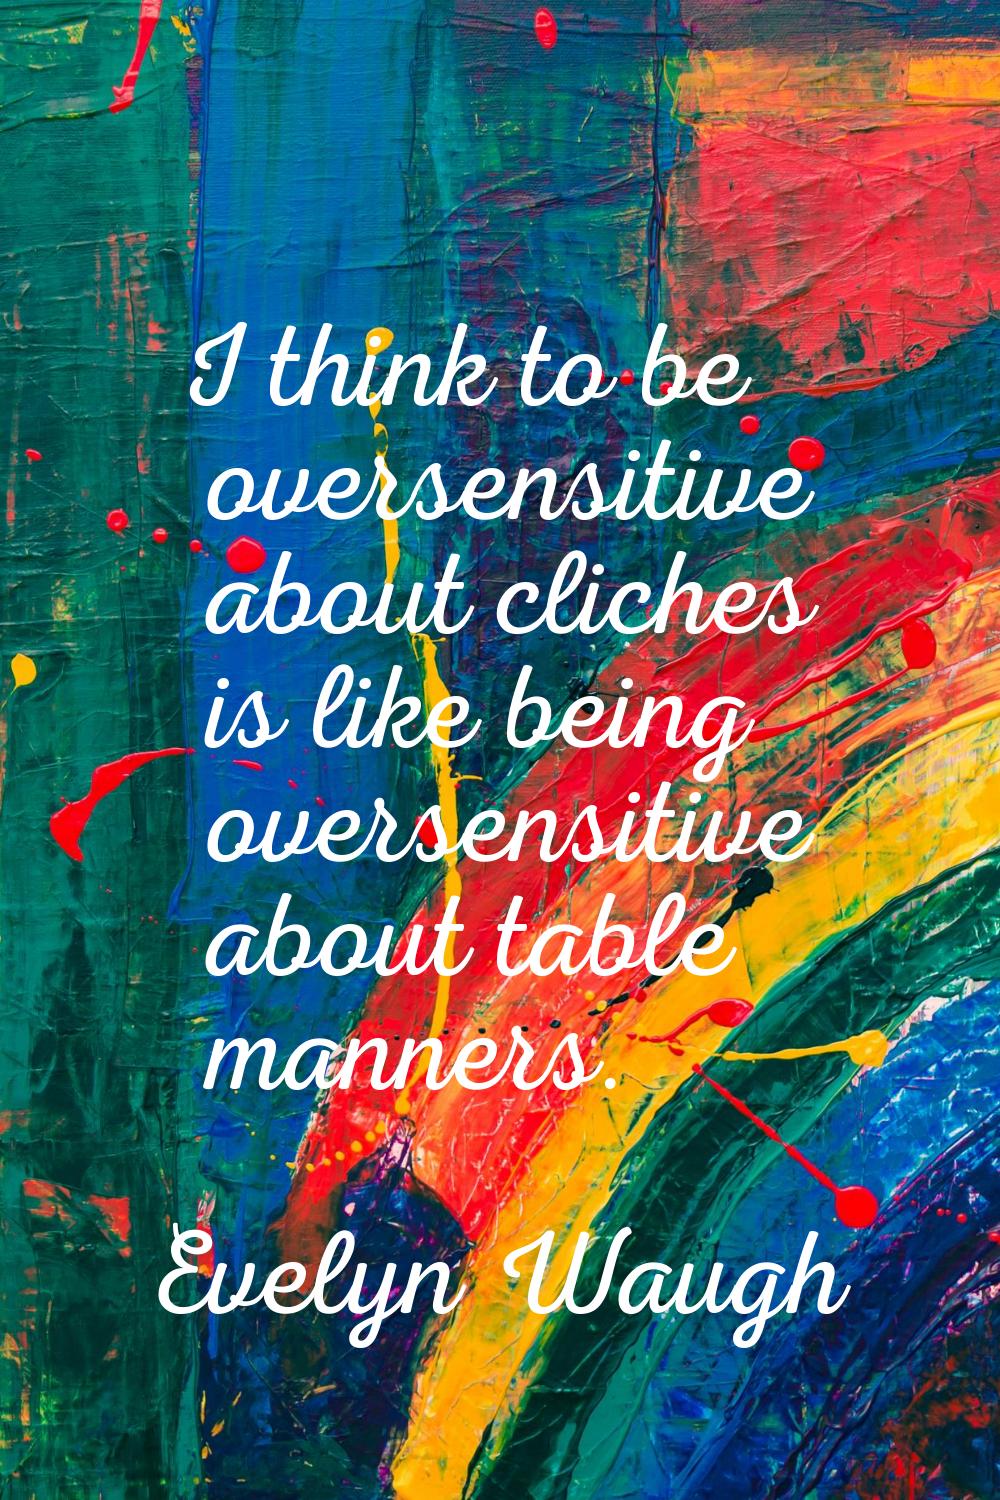 I think to be oversensitive about cliches is like being oversensitive about table manners.